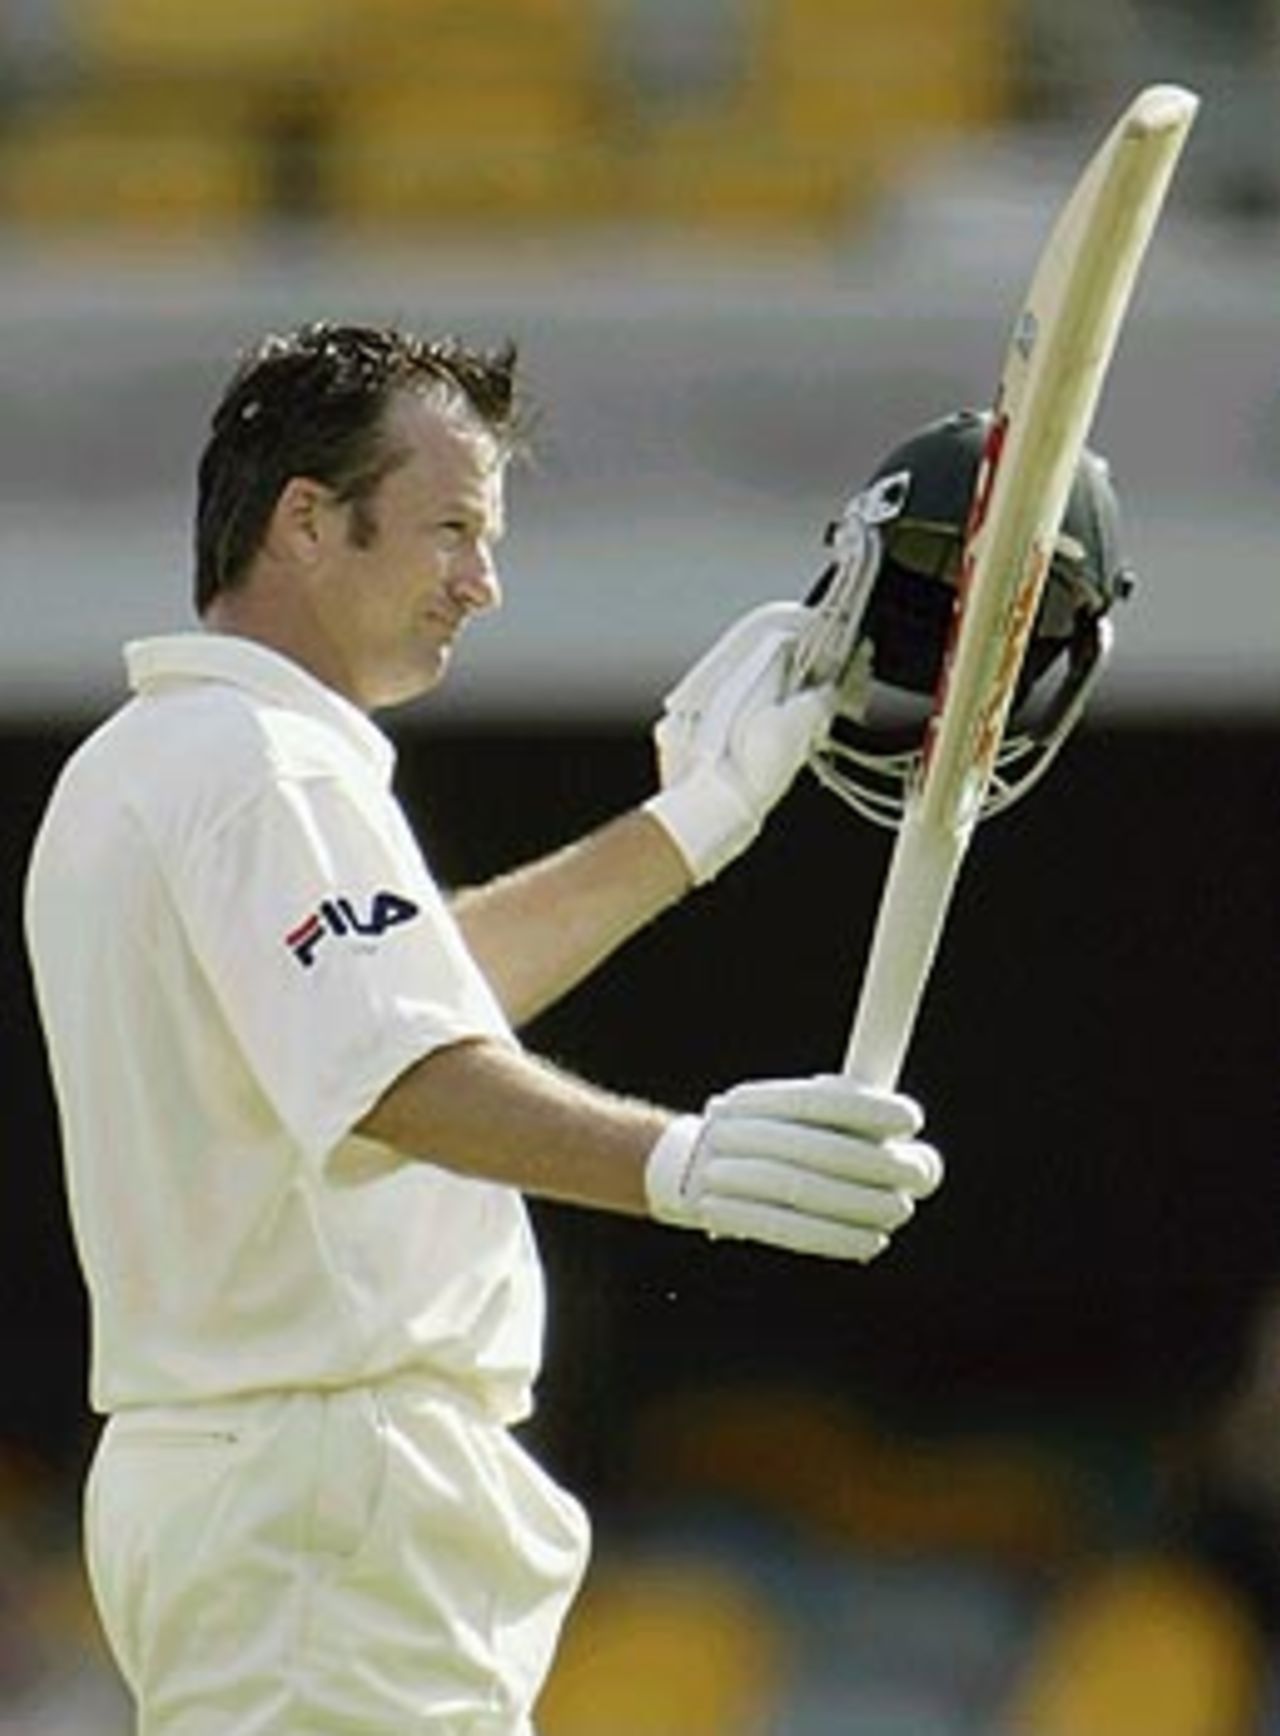 Steve Waugh acknowledges the applause on reaching his last Test 50 at the Gabba, Australia v India, 1st Test, Brisbane, 5th day, December 8, 2003